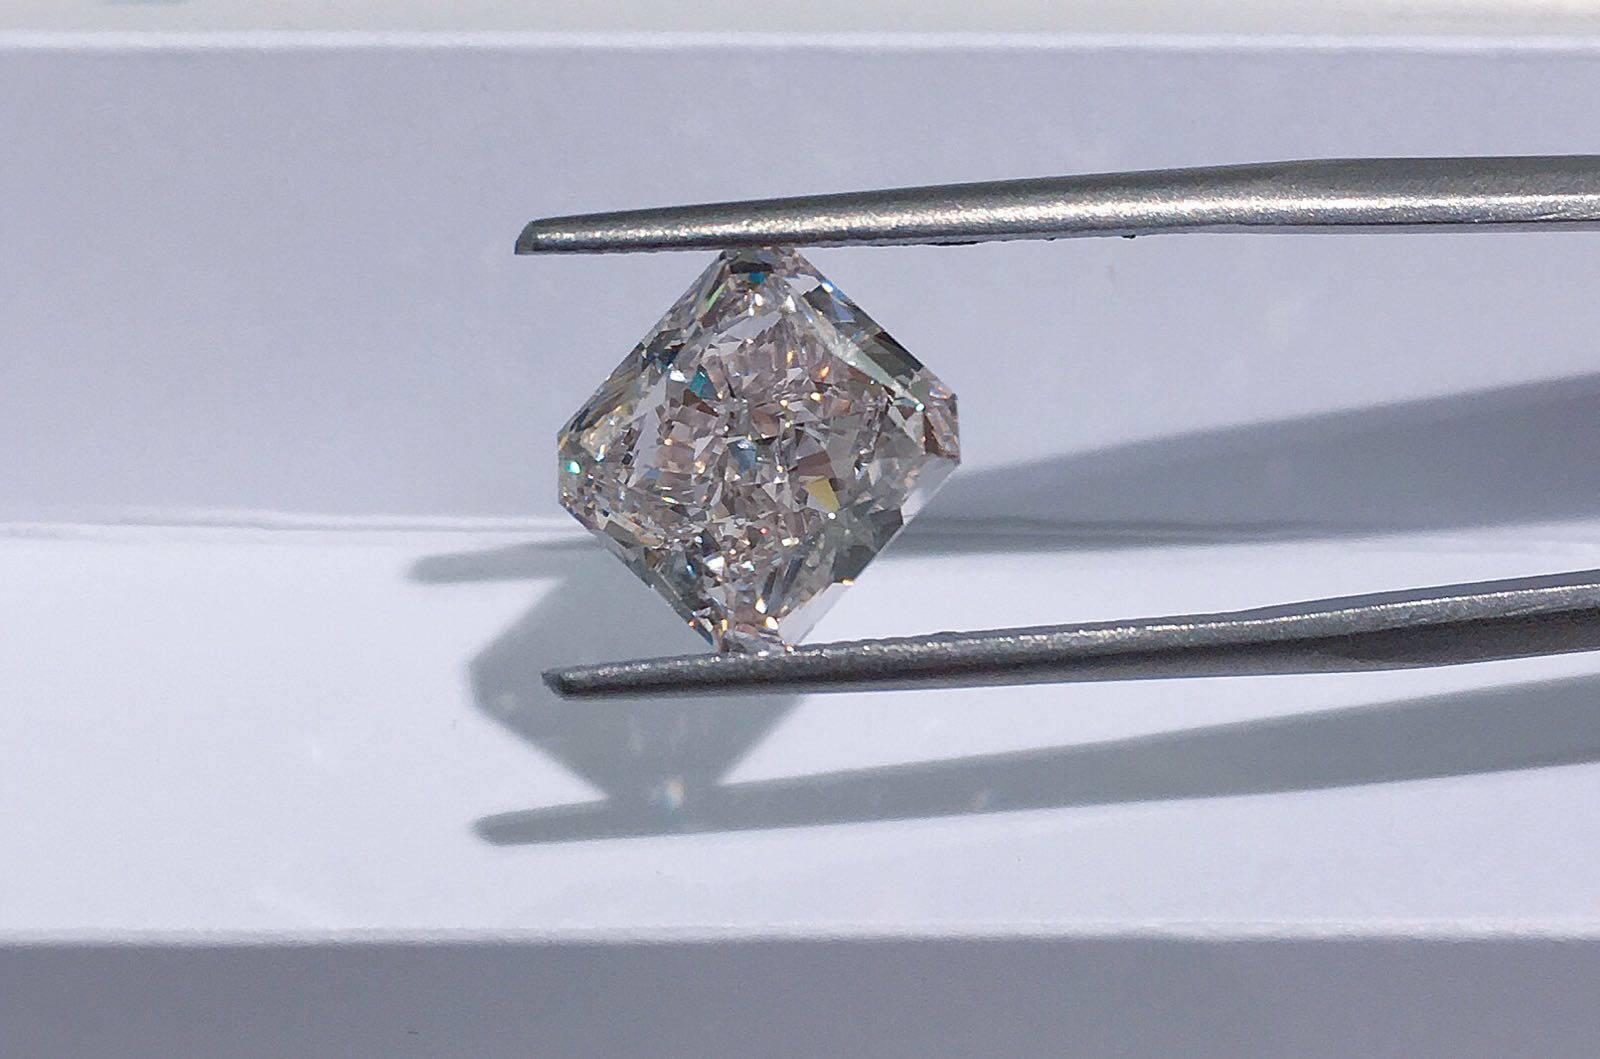 Exceedingly rare, 5.14 carat fancy light pink, radiant cut, VVS1, type IIa loose diamond. 
Type IIa diamonds are the most chemically pure type of diamond and often have exceptional optical transparency.
Examples of famous type IIa diamonds are the